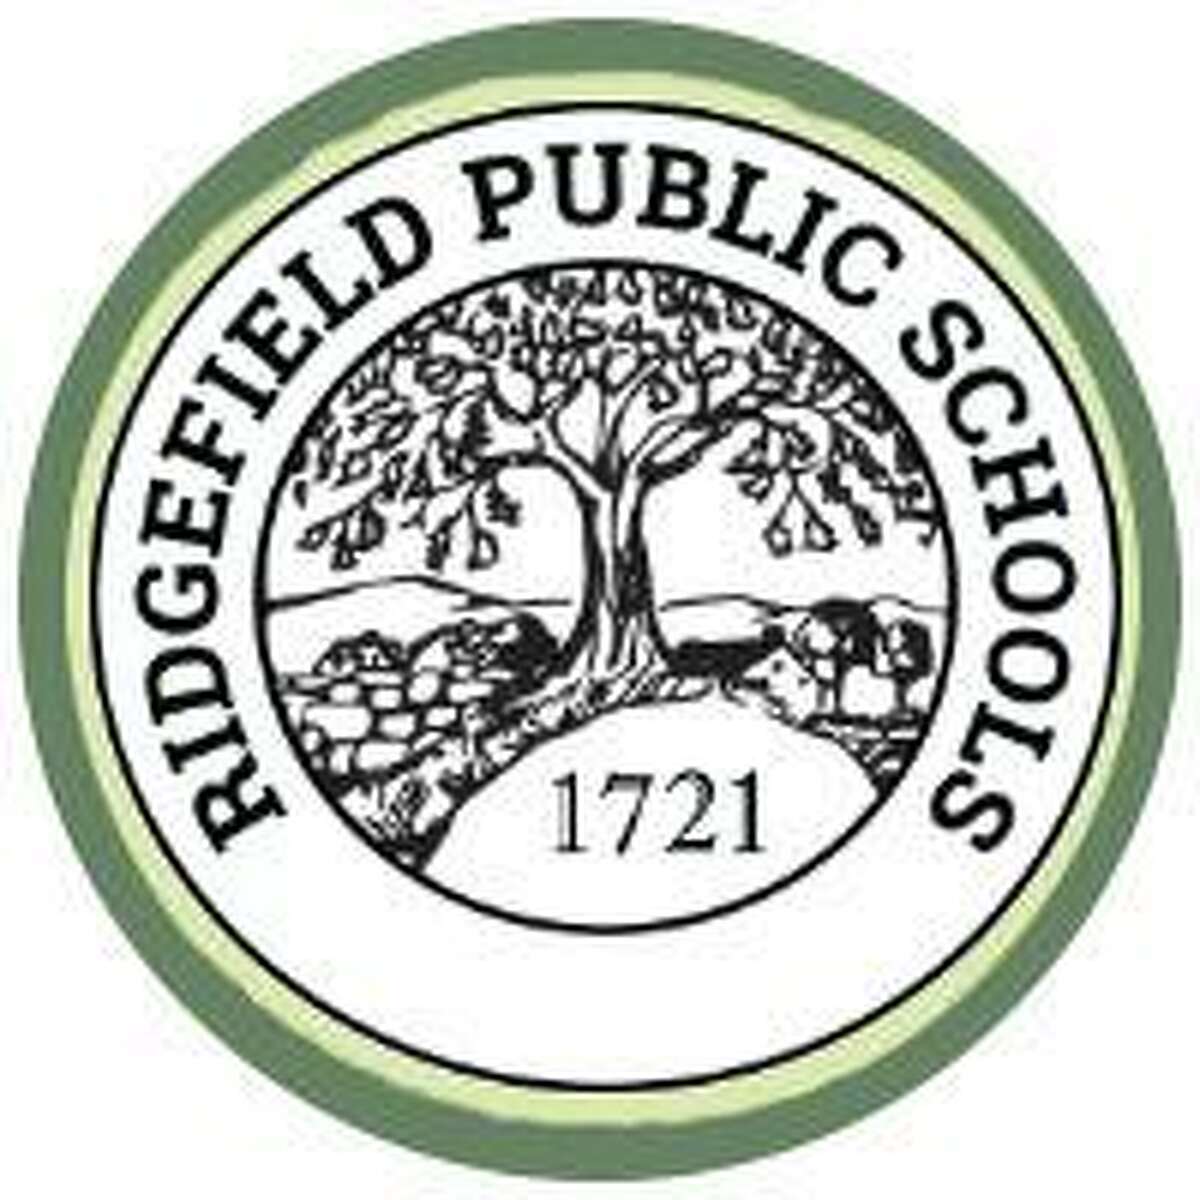 The Ridgefield School District must comply with federal and state education laws.